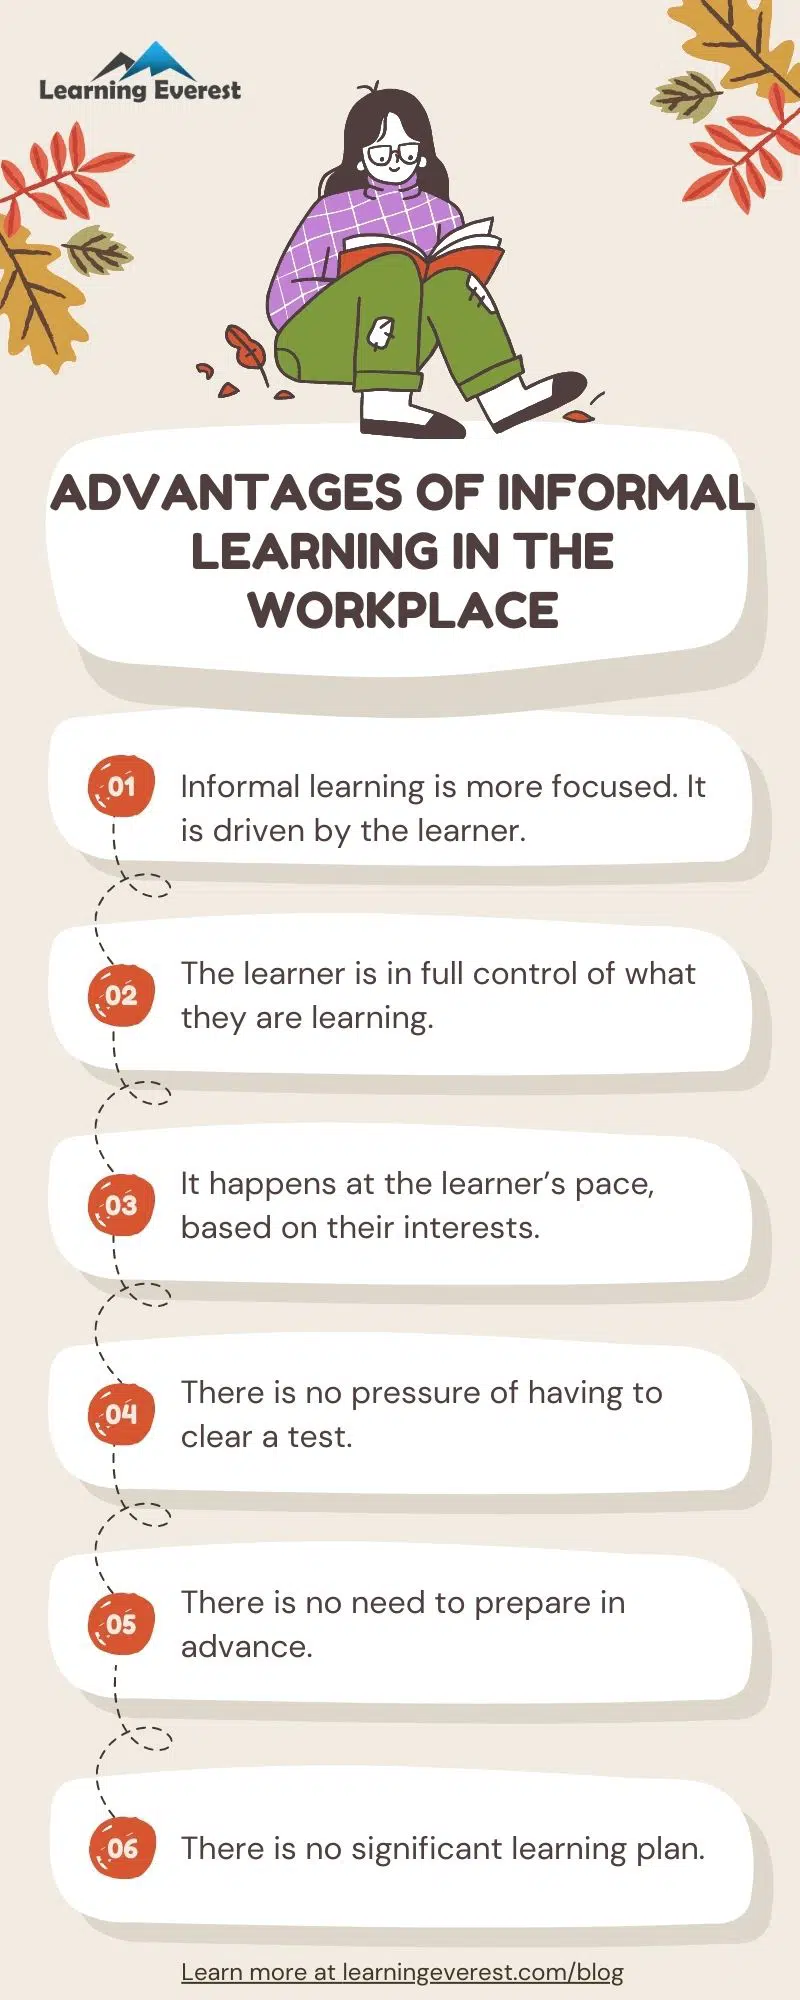 Advantages of Informal Learning at the Workplace